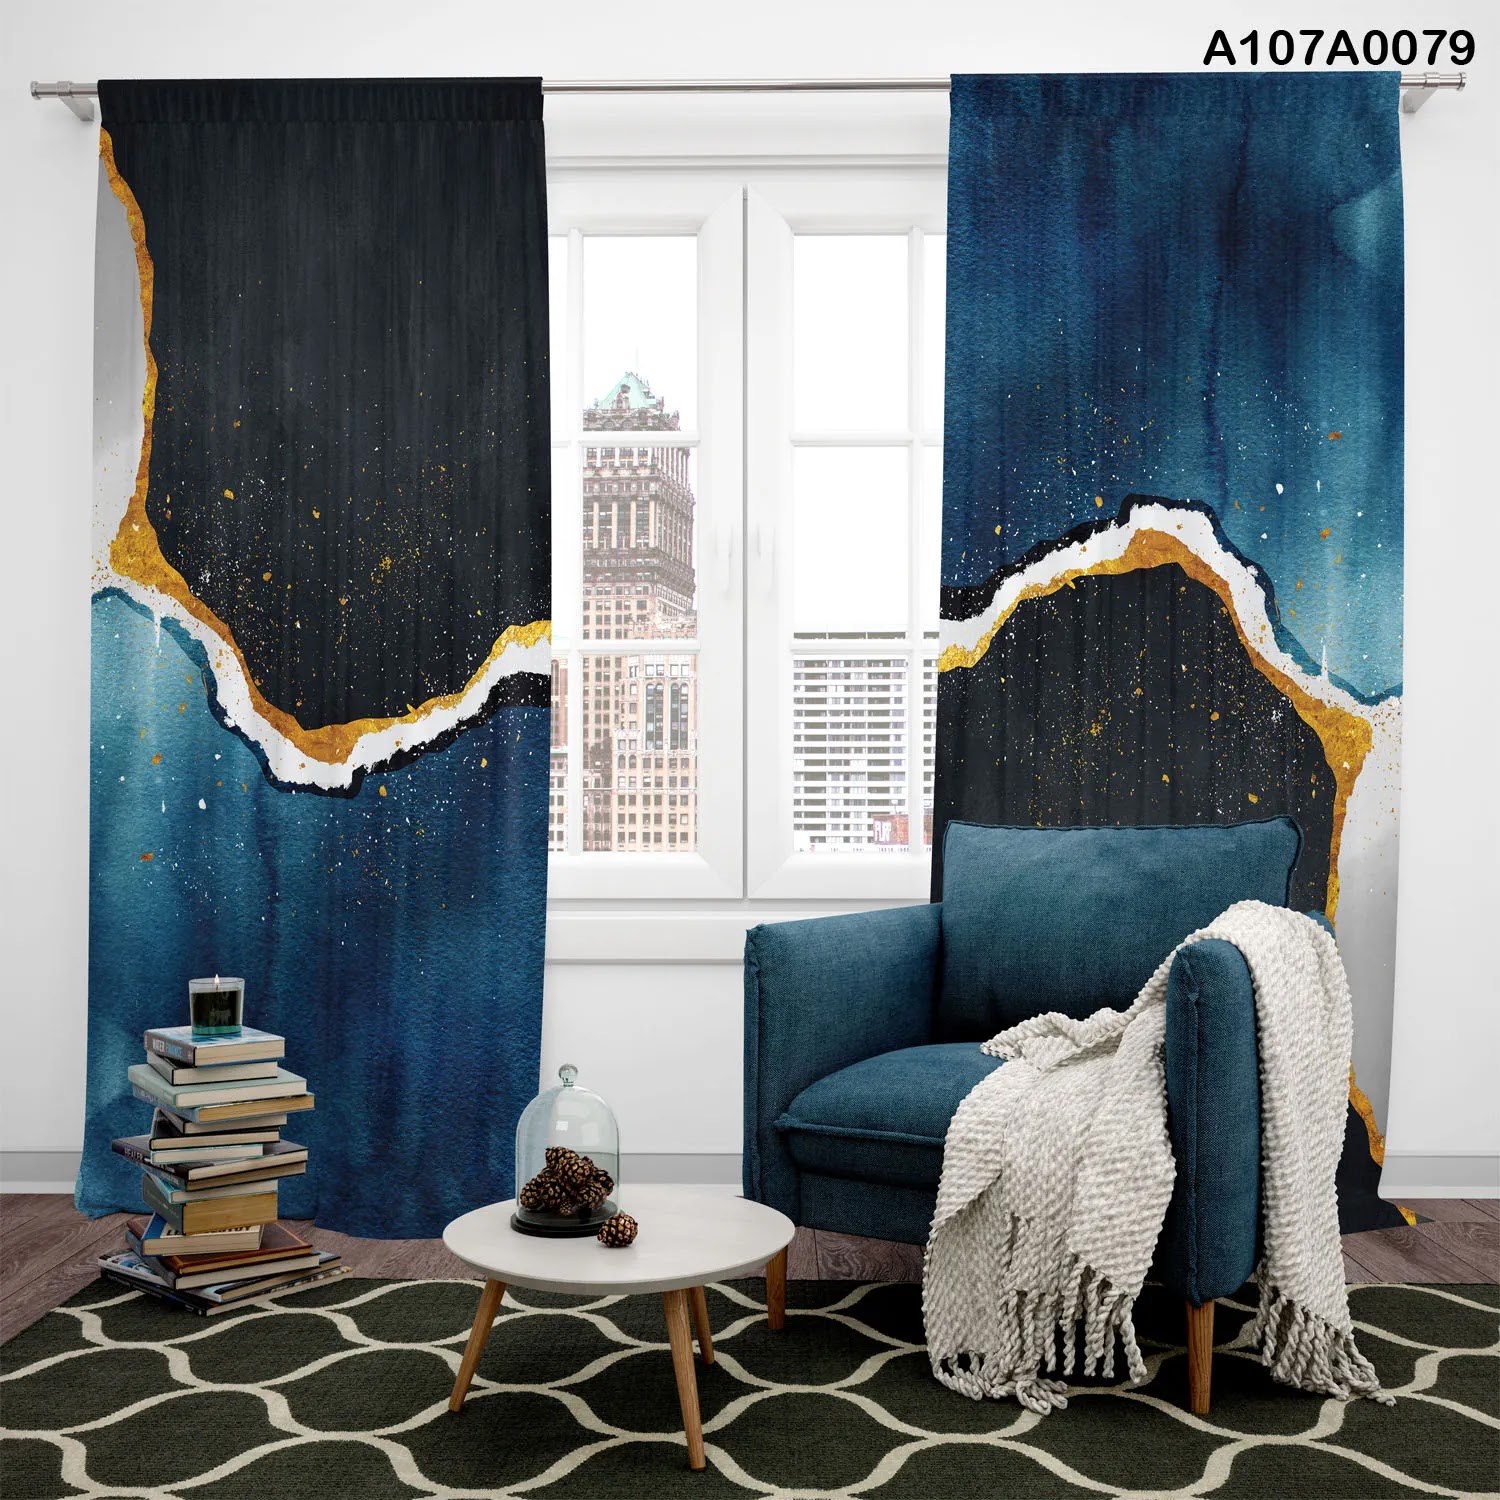 Curtains for offices in blue, navy and gold